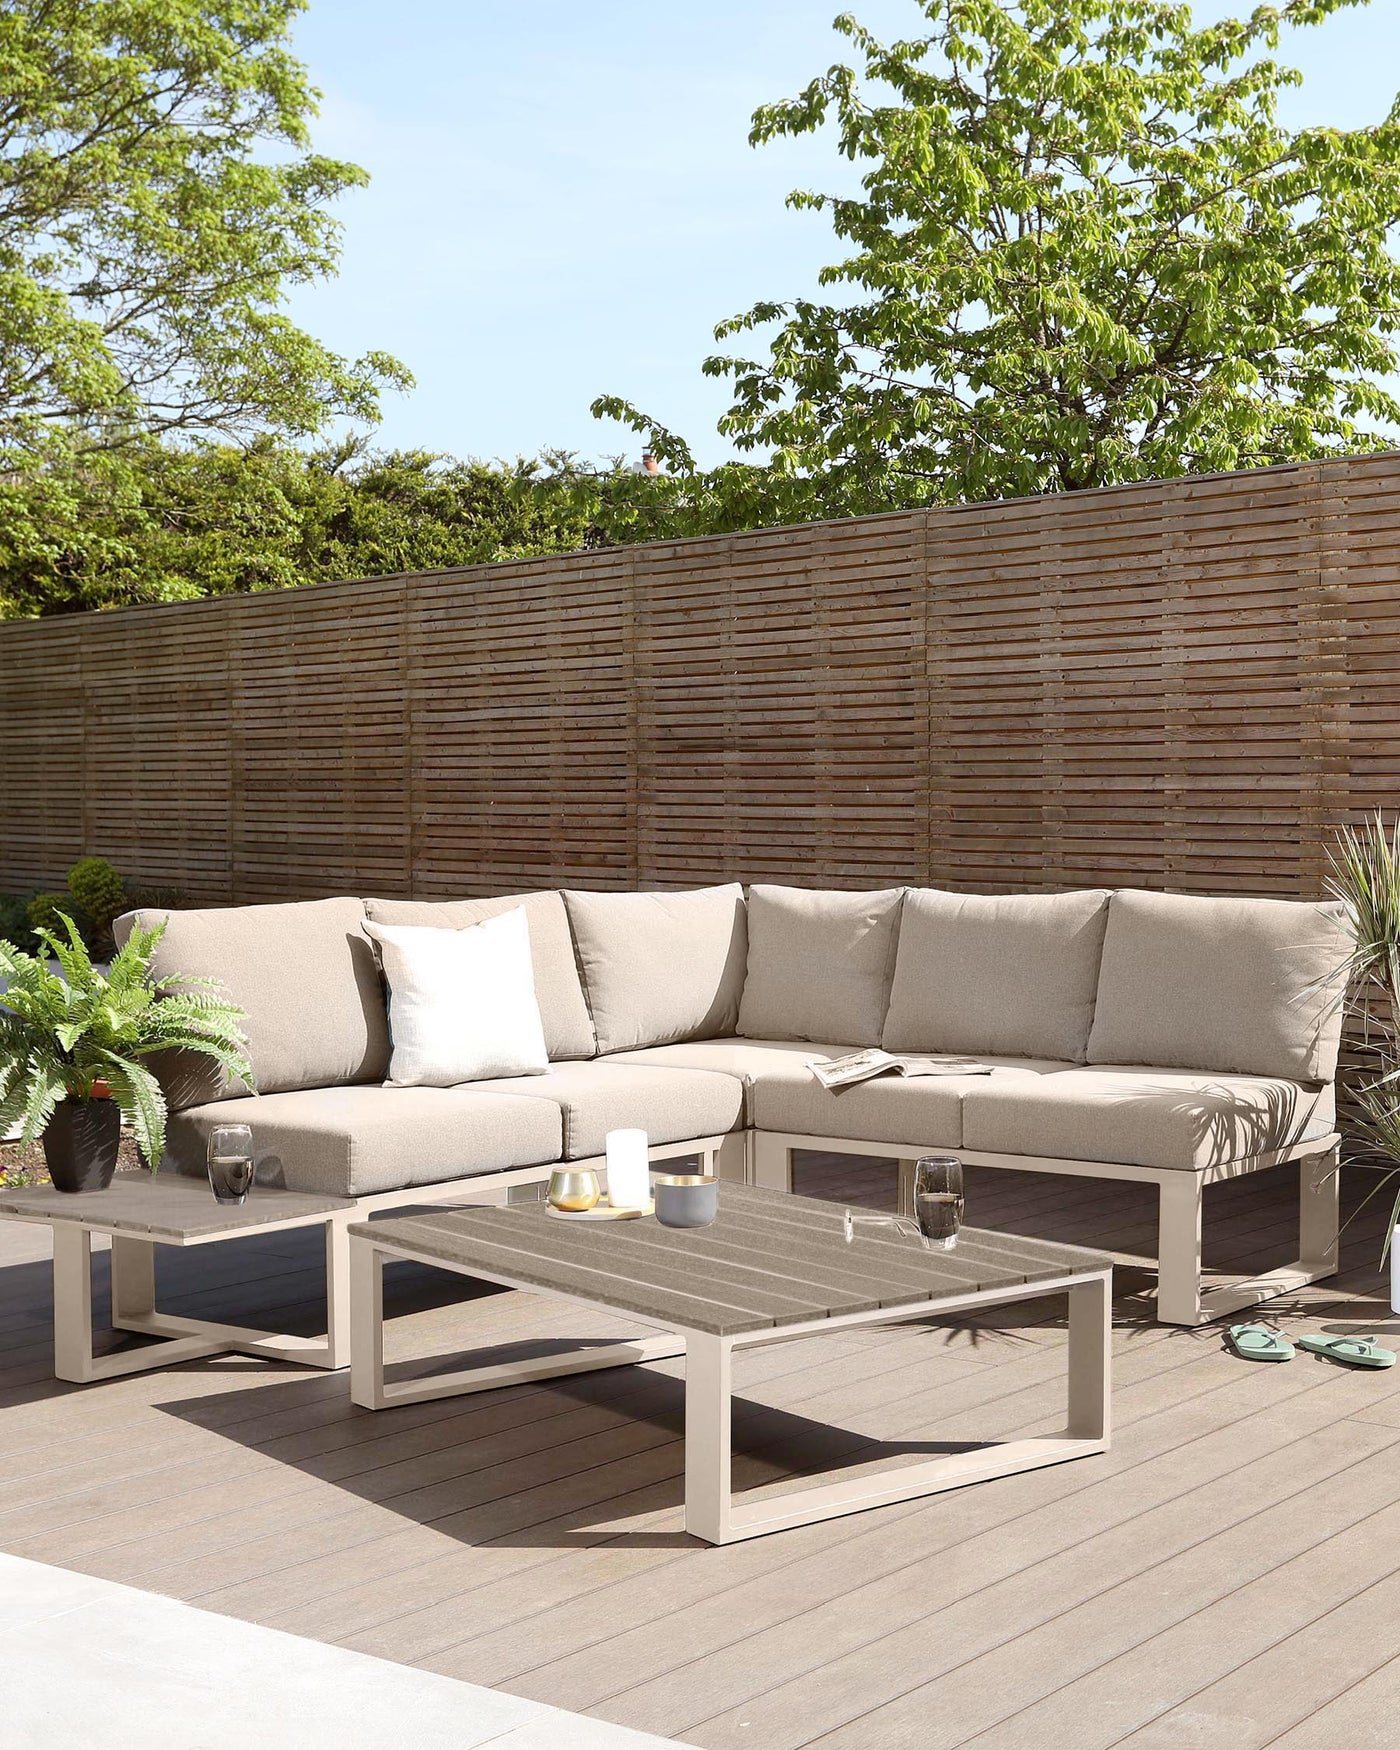 Outdoor patio furniture featuring a modular L-shaped sectional sofa with light taupe cushions and a matching low-profile rectangular coffee table with a slatted top, both with a minimalist metallic frame in light grey, set on a wooden deck.